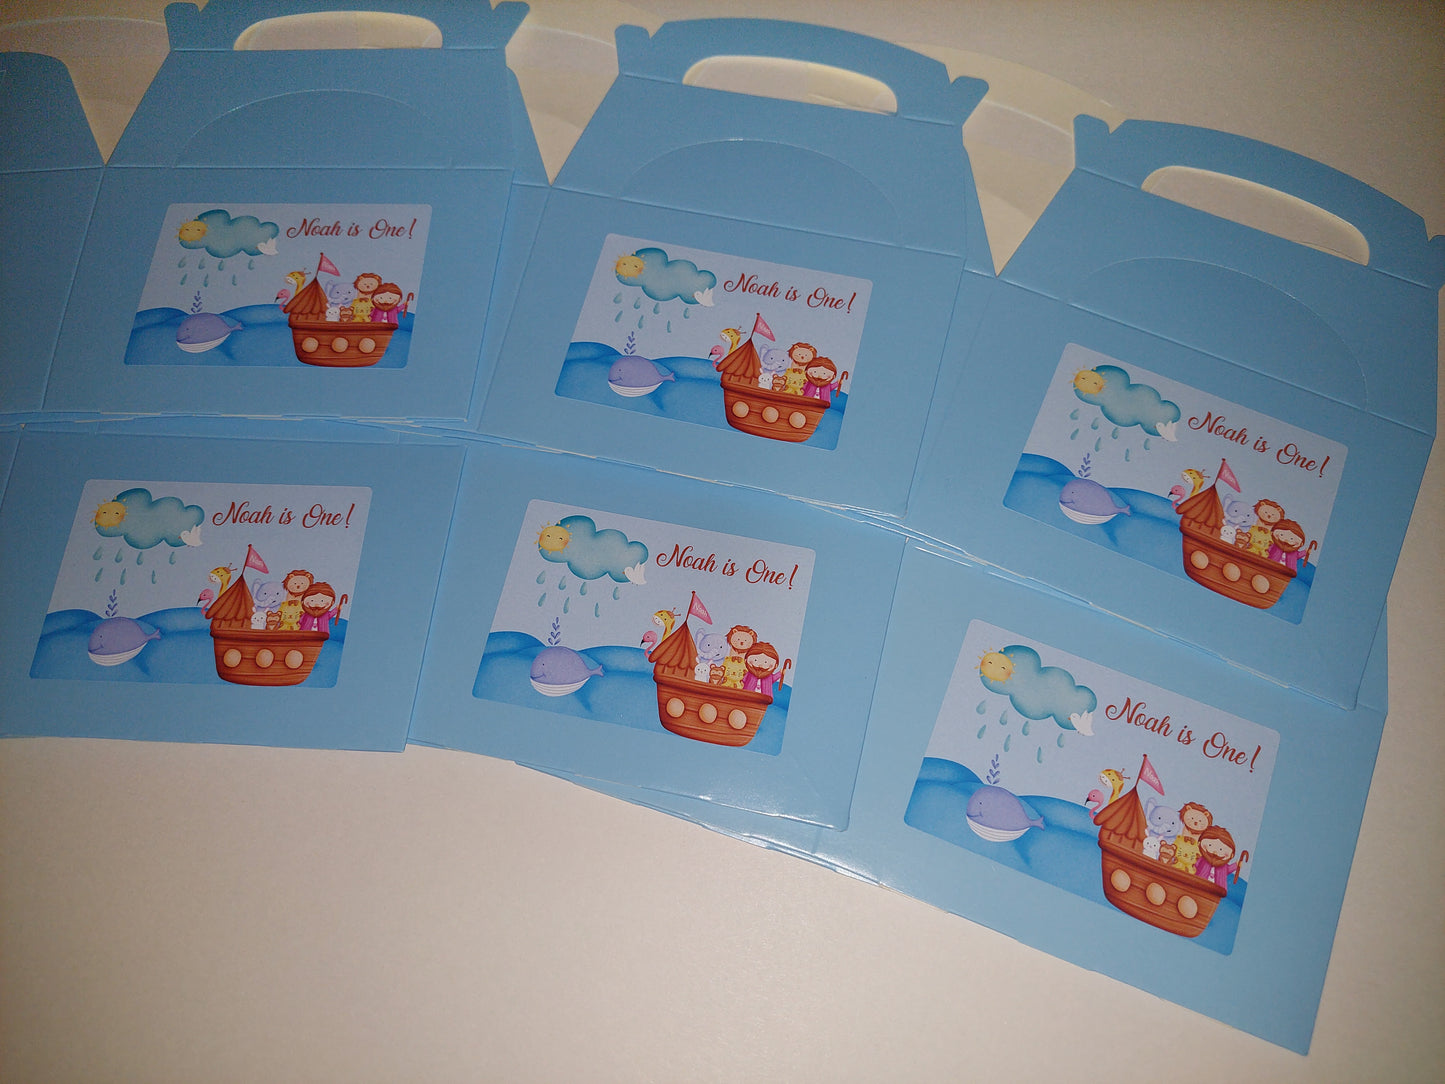 Party Boxes | Noah's Ark Birthday Party Boxes | Noah's Ark Party | Noah's Ark Party Decor | Party Bags (Design 2)